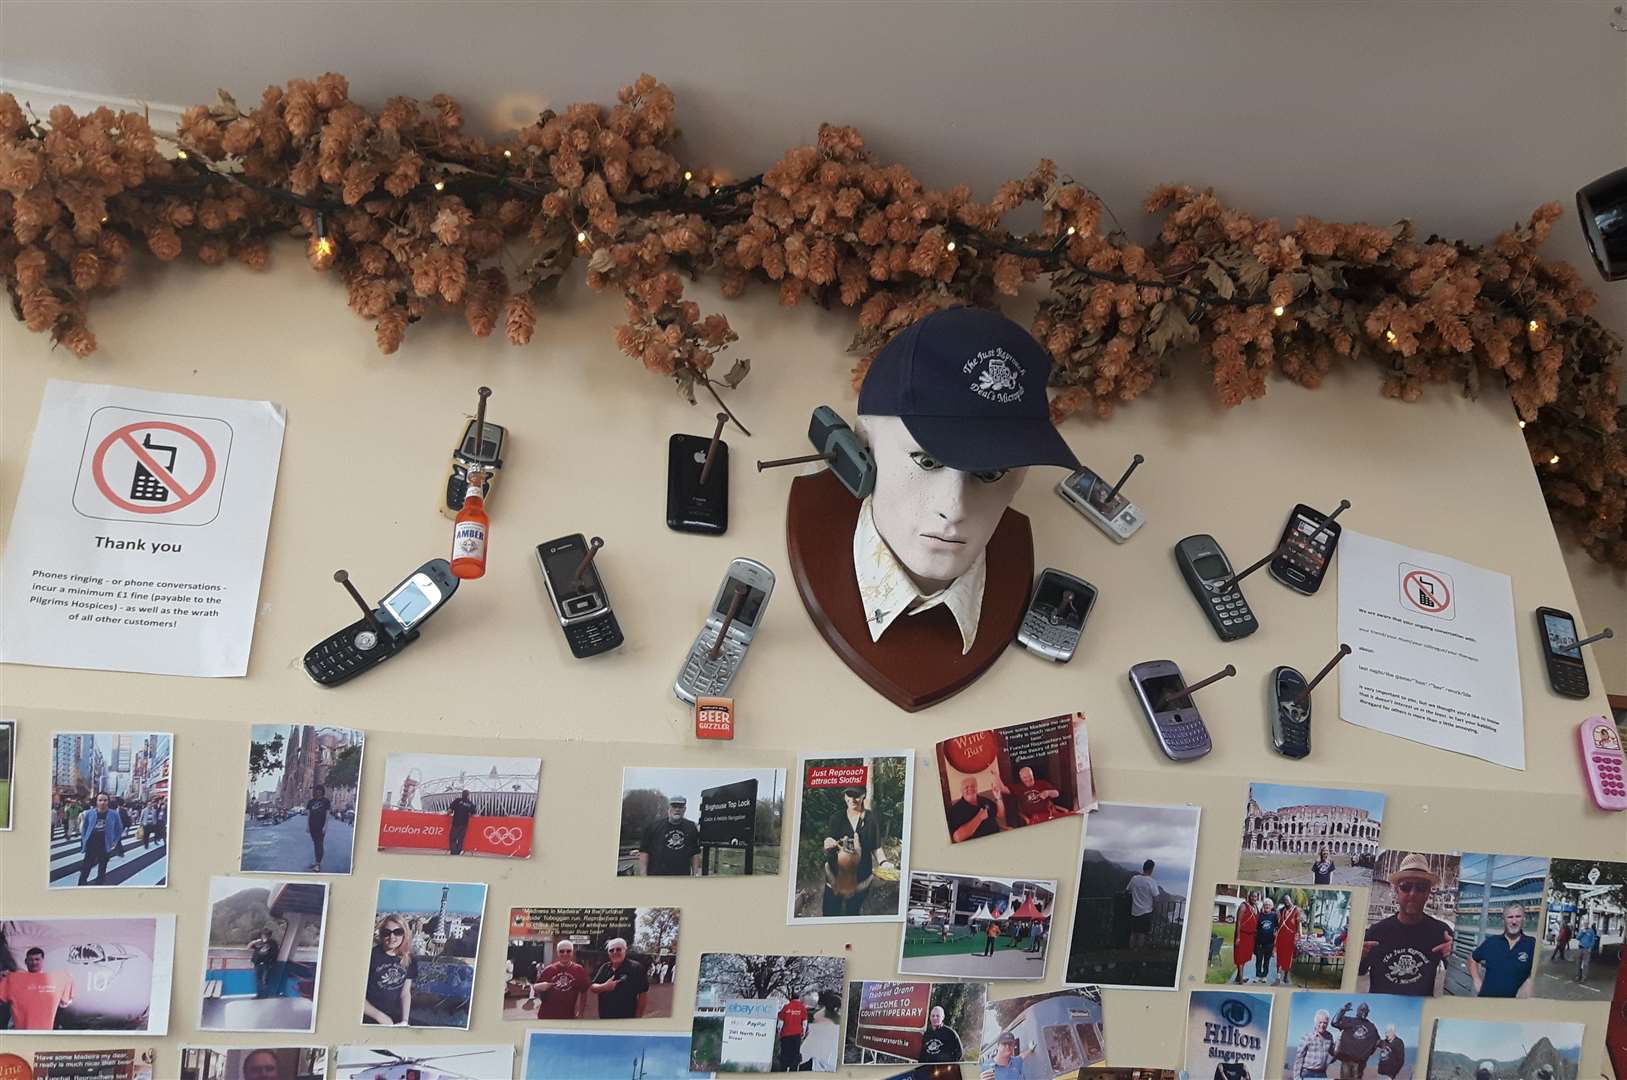 The rules about phone use are displayed on the main wall inside the micropub (3600963)